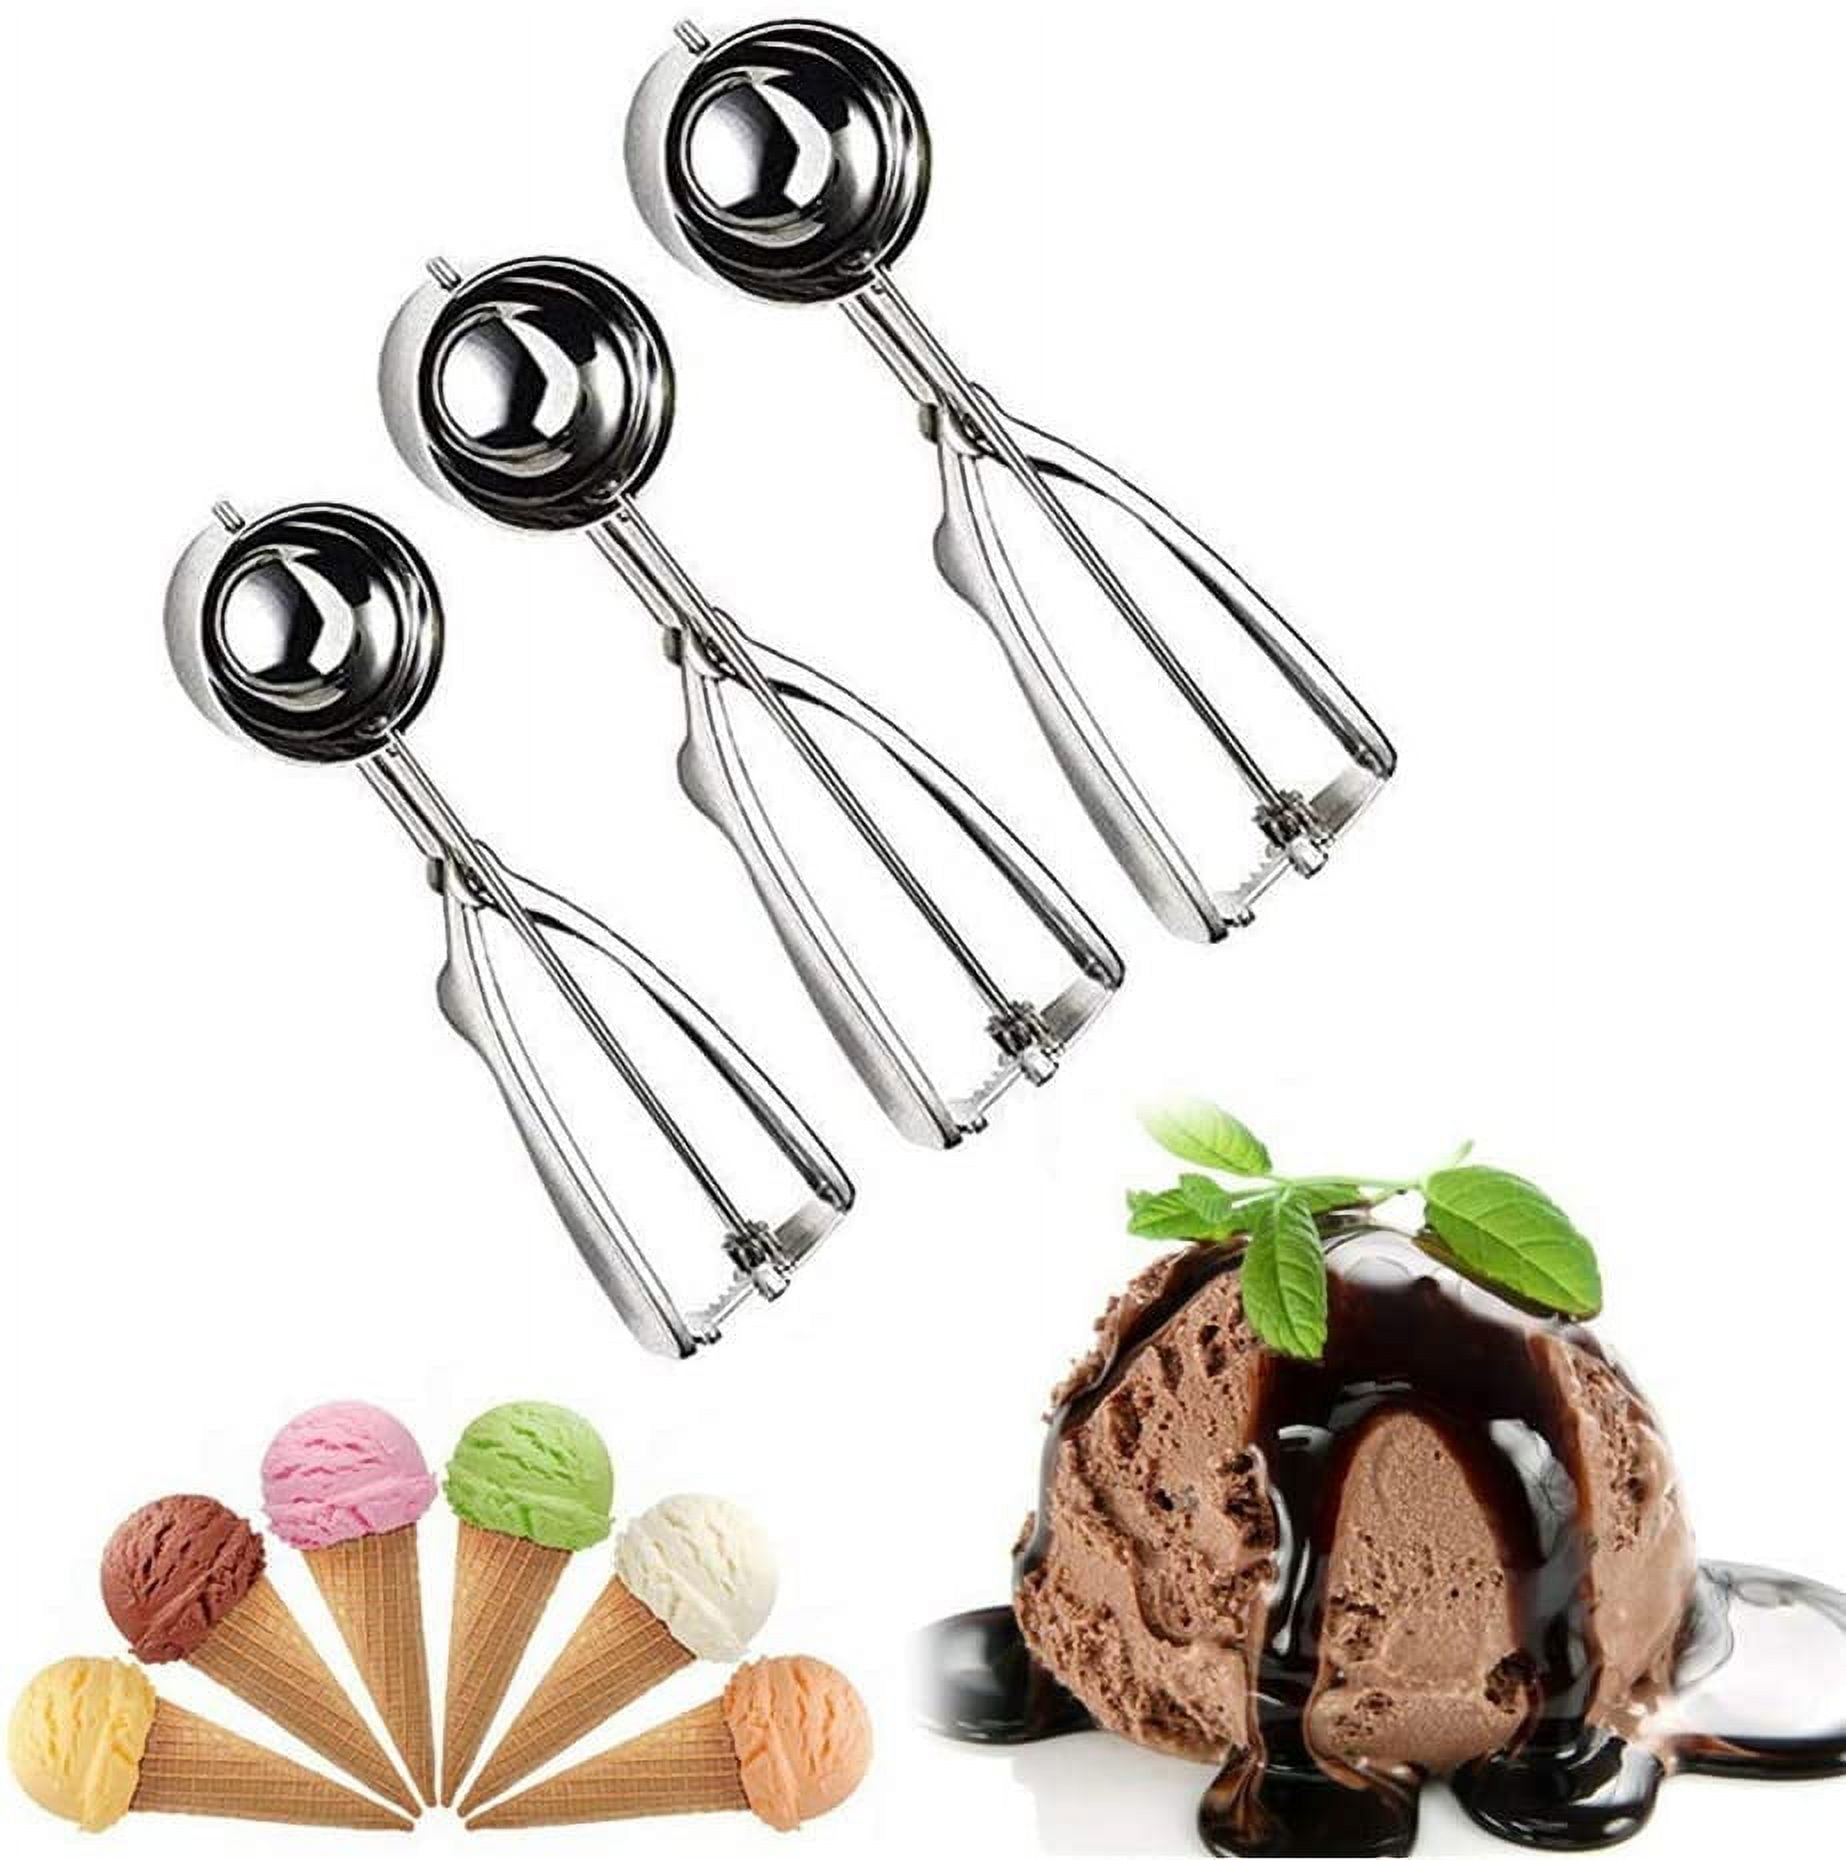 Fayomir Small Cookie Scoop 1 Tablespoon, Size #60 Cookie Dough Scoop, 1  Tbsp Cookie Scoop for Baking, Melon Baller Scoop, Selected 18/8 Stainless